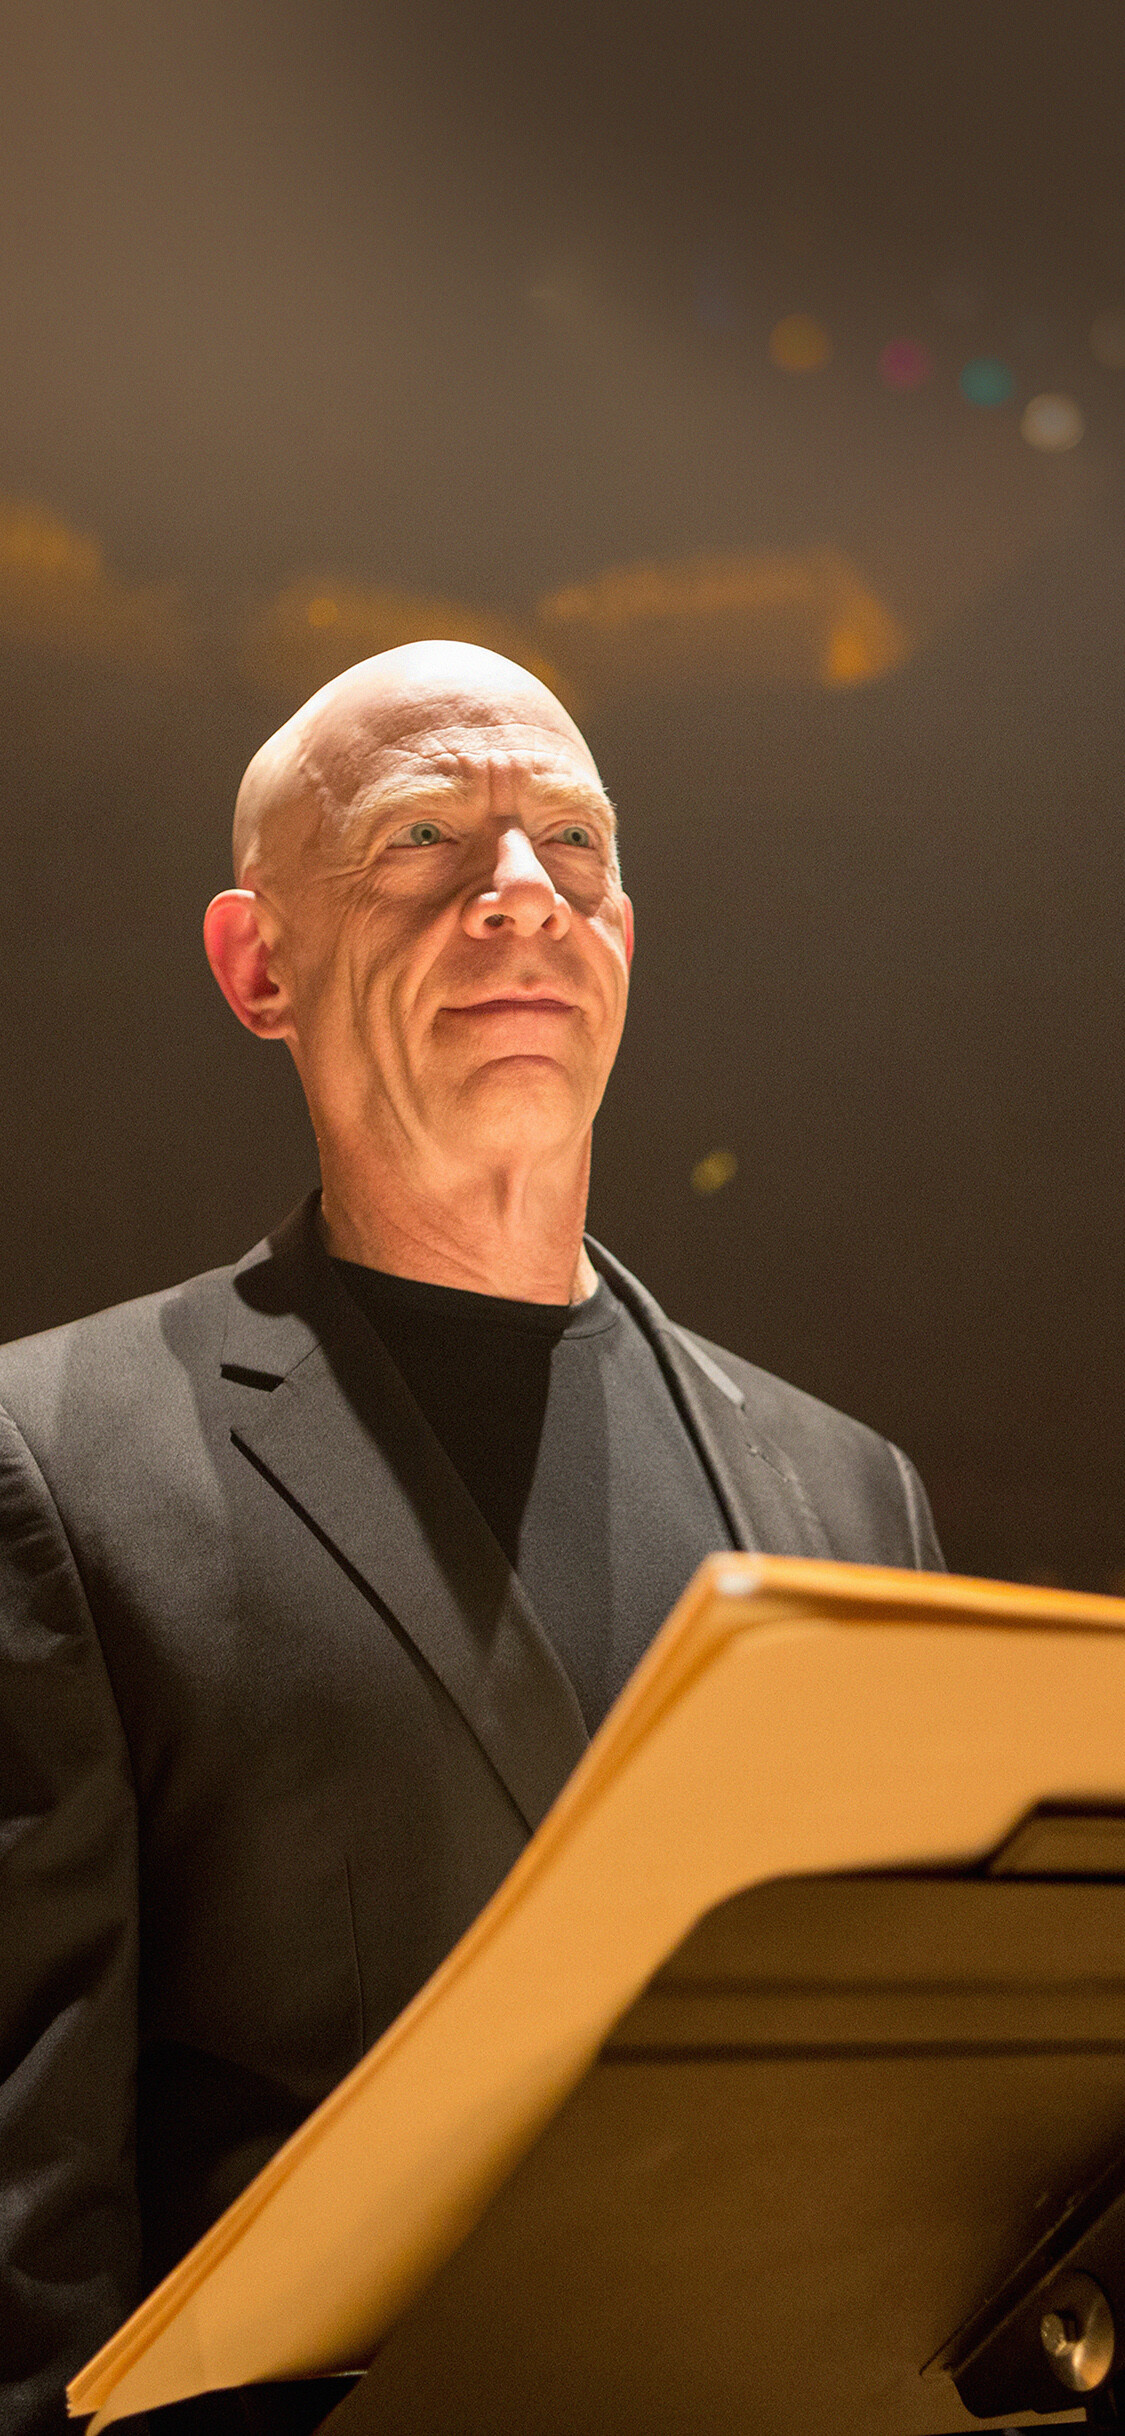 Whiplash: Simmons' portrayal of Fletcher won him The Academy Award for Best Supporting Actor. 1130x2440 HD Wallpaper.